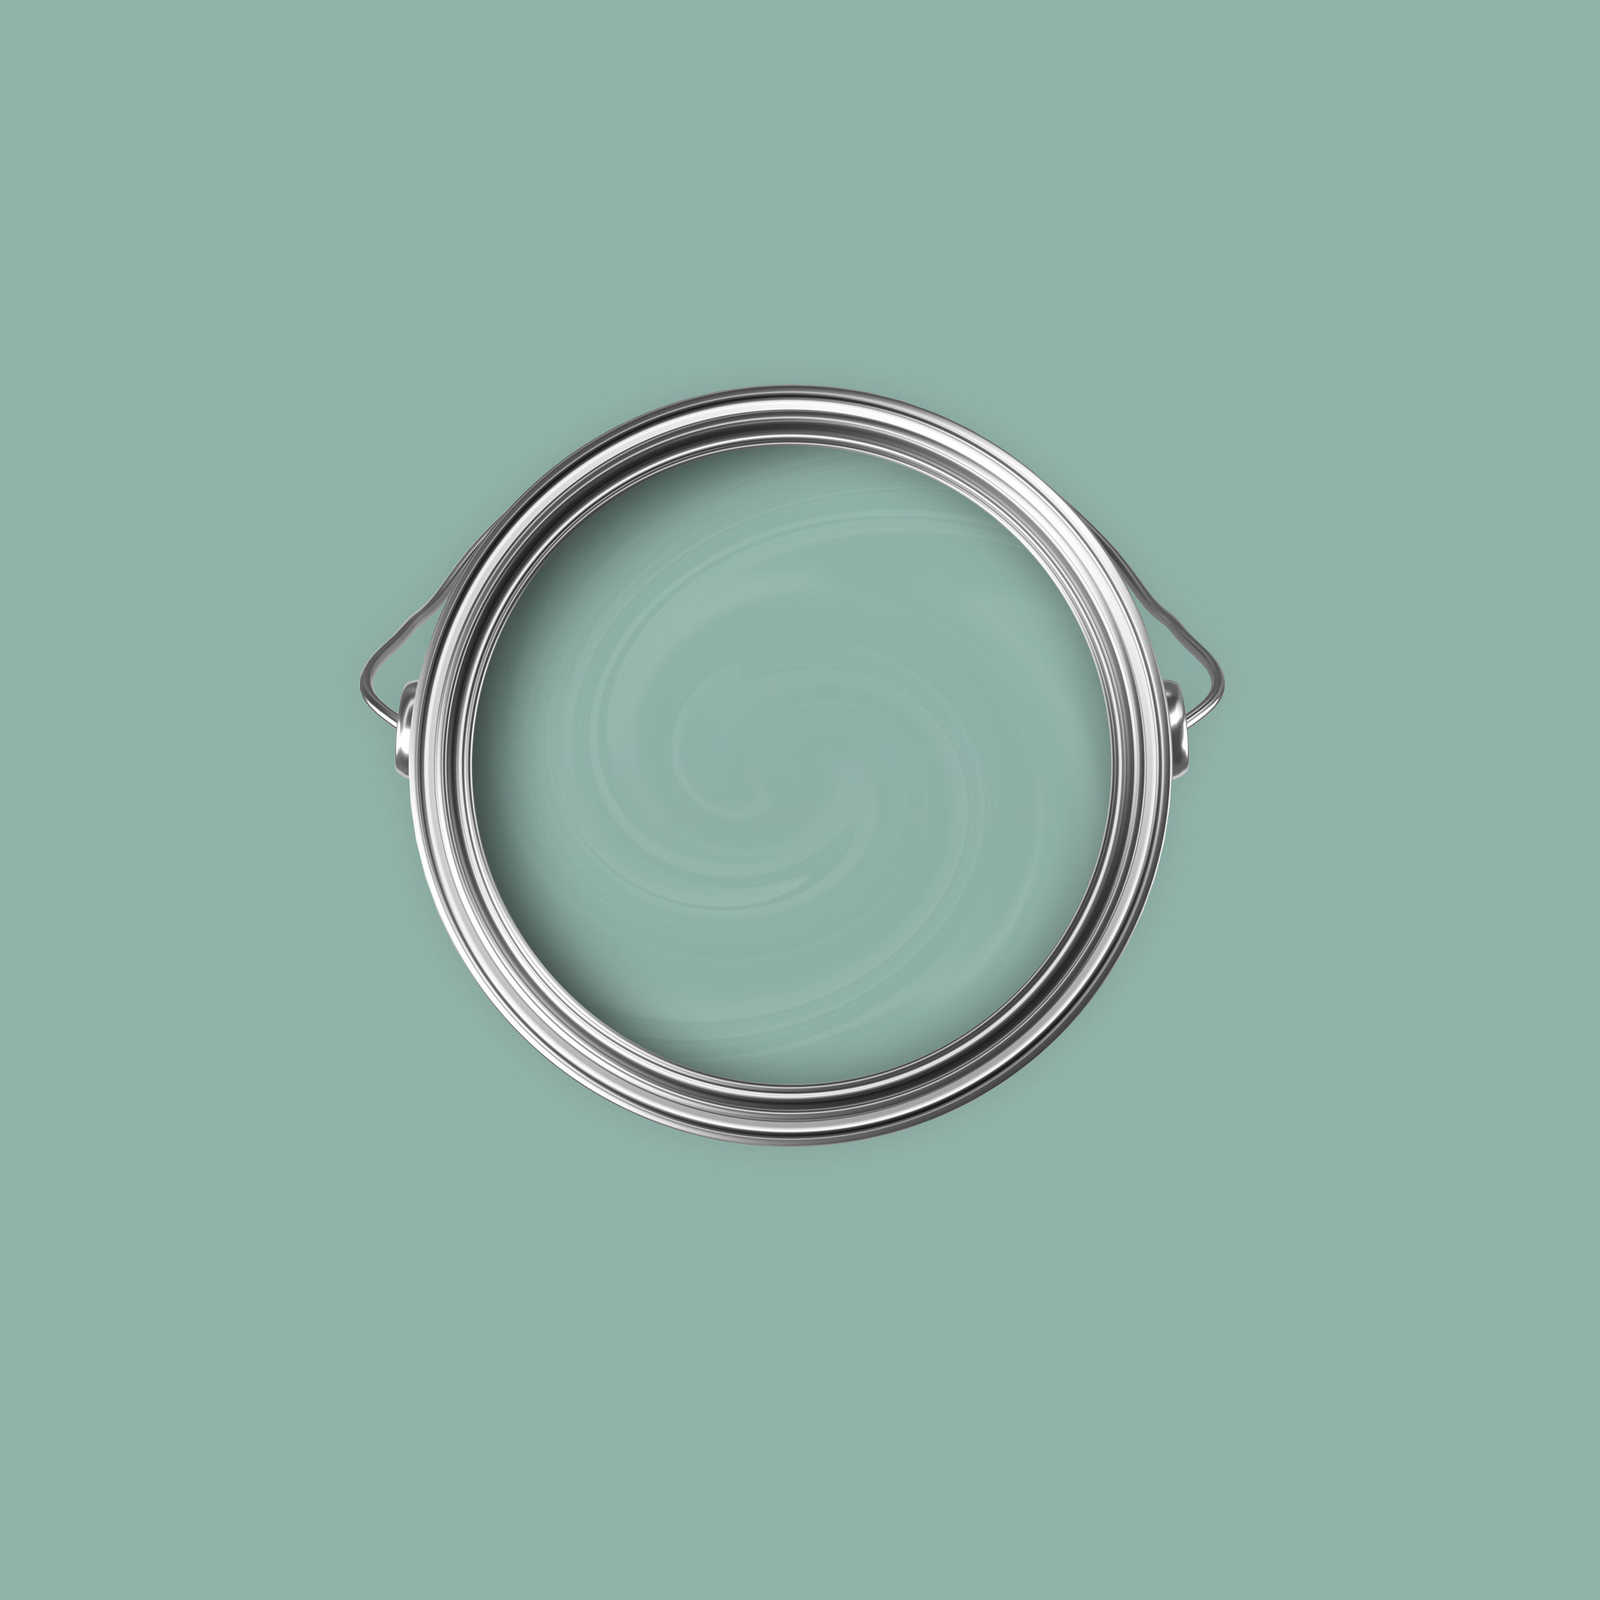             Premium Wall Paint Friendly Jade Green »Sweet Sage« NW402 – 2.5 litre
        